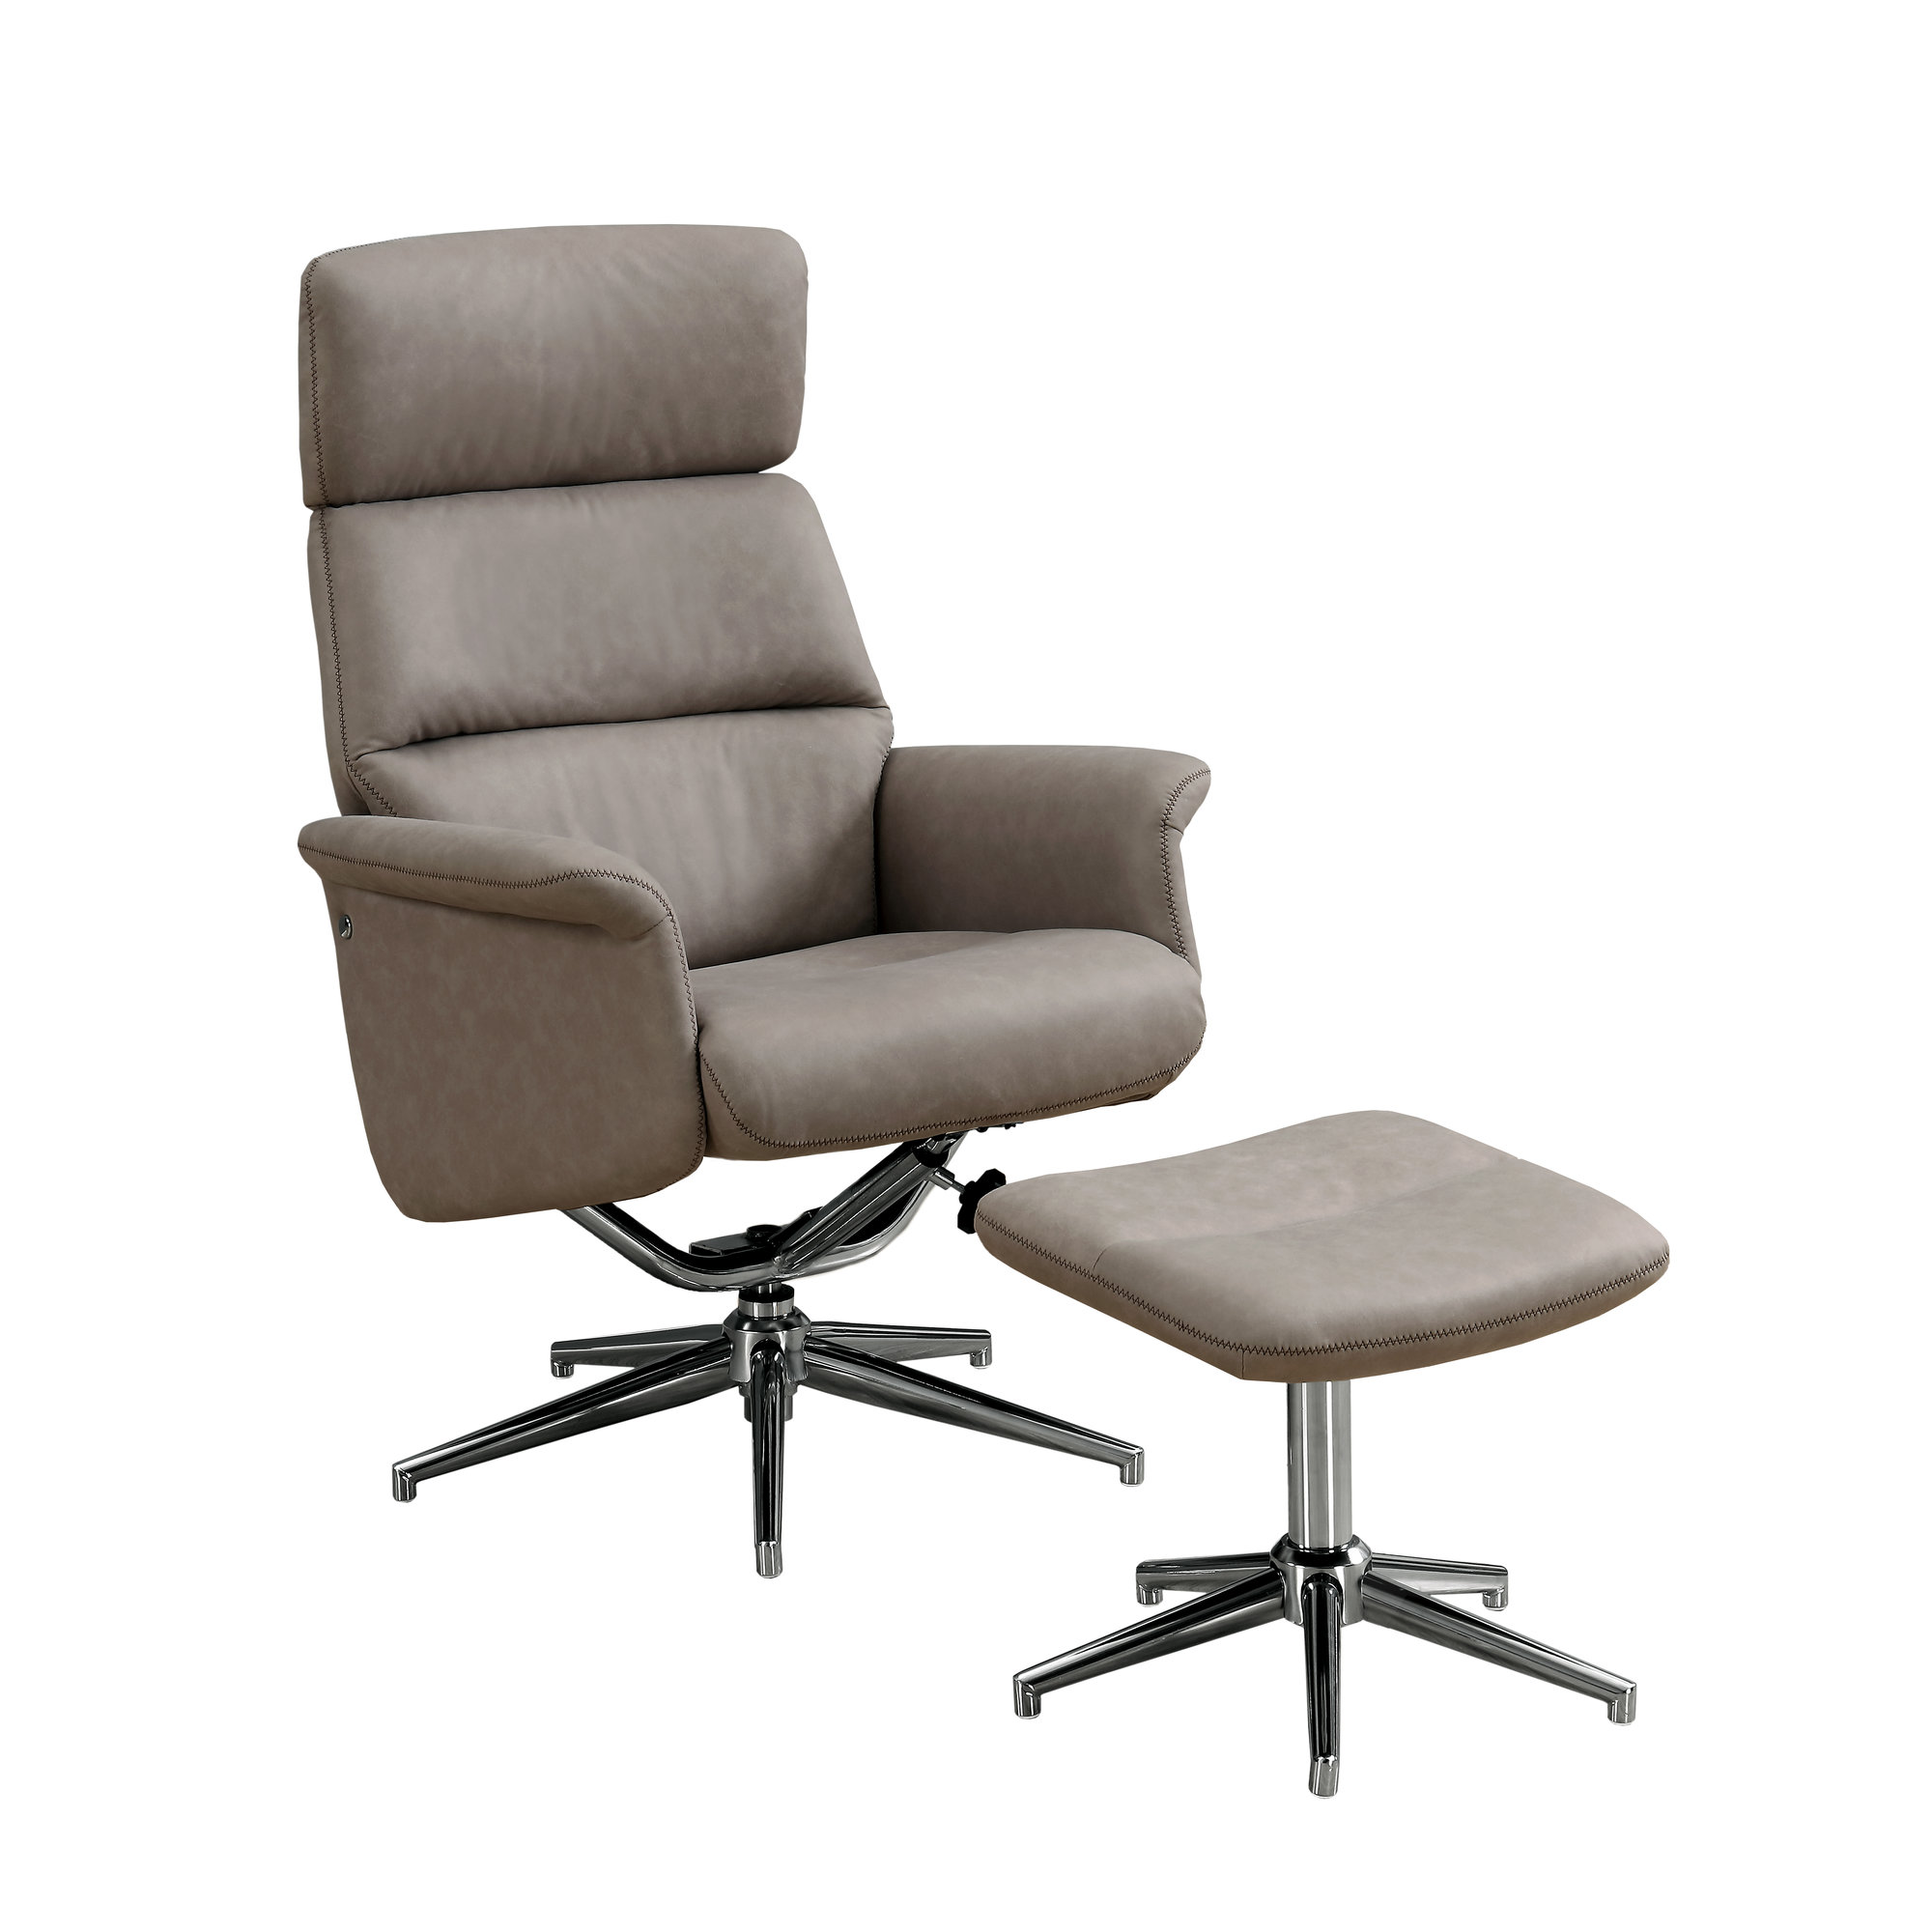 44" x 46" x 57.5" Taupe Finish Foam and Metal Swivel Reclining Chair with Adjustable Headrest